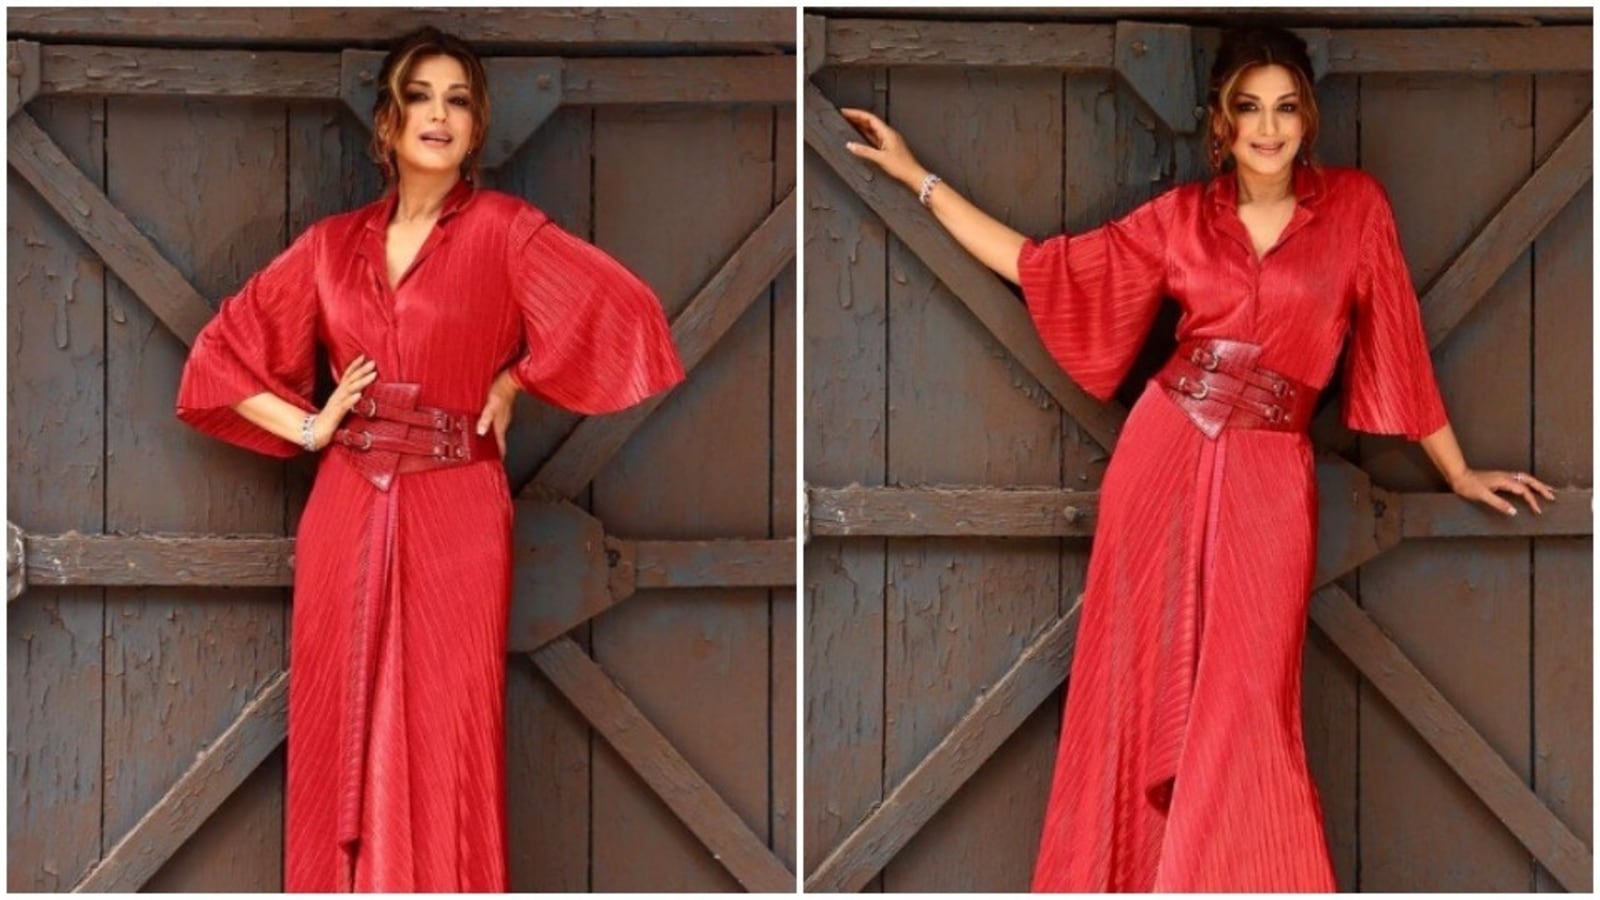 Xxx Sonali Bendre Video Hd - Sonali Bendre declares her love for red in a gorgeous gown | Hindustan Times